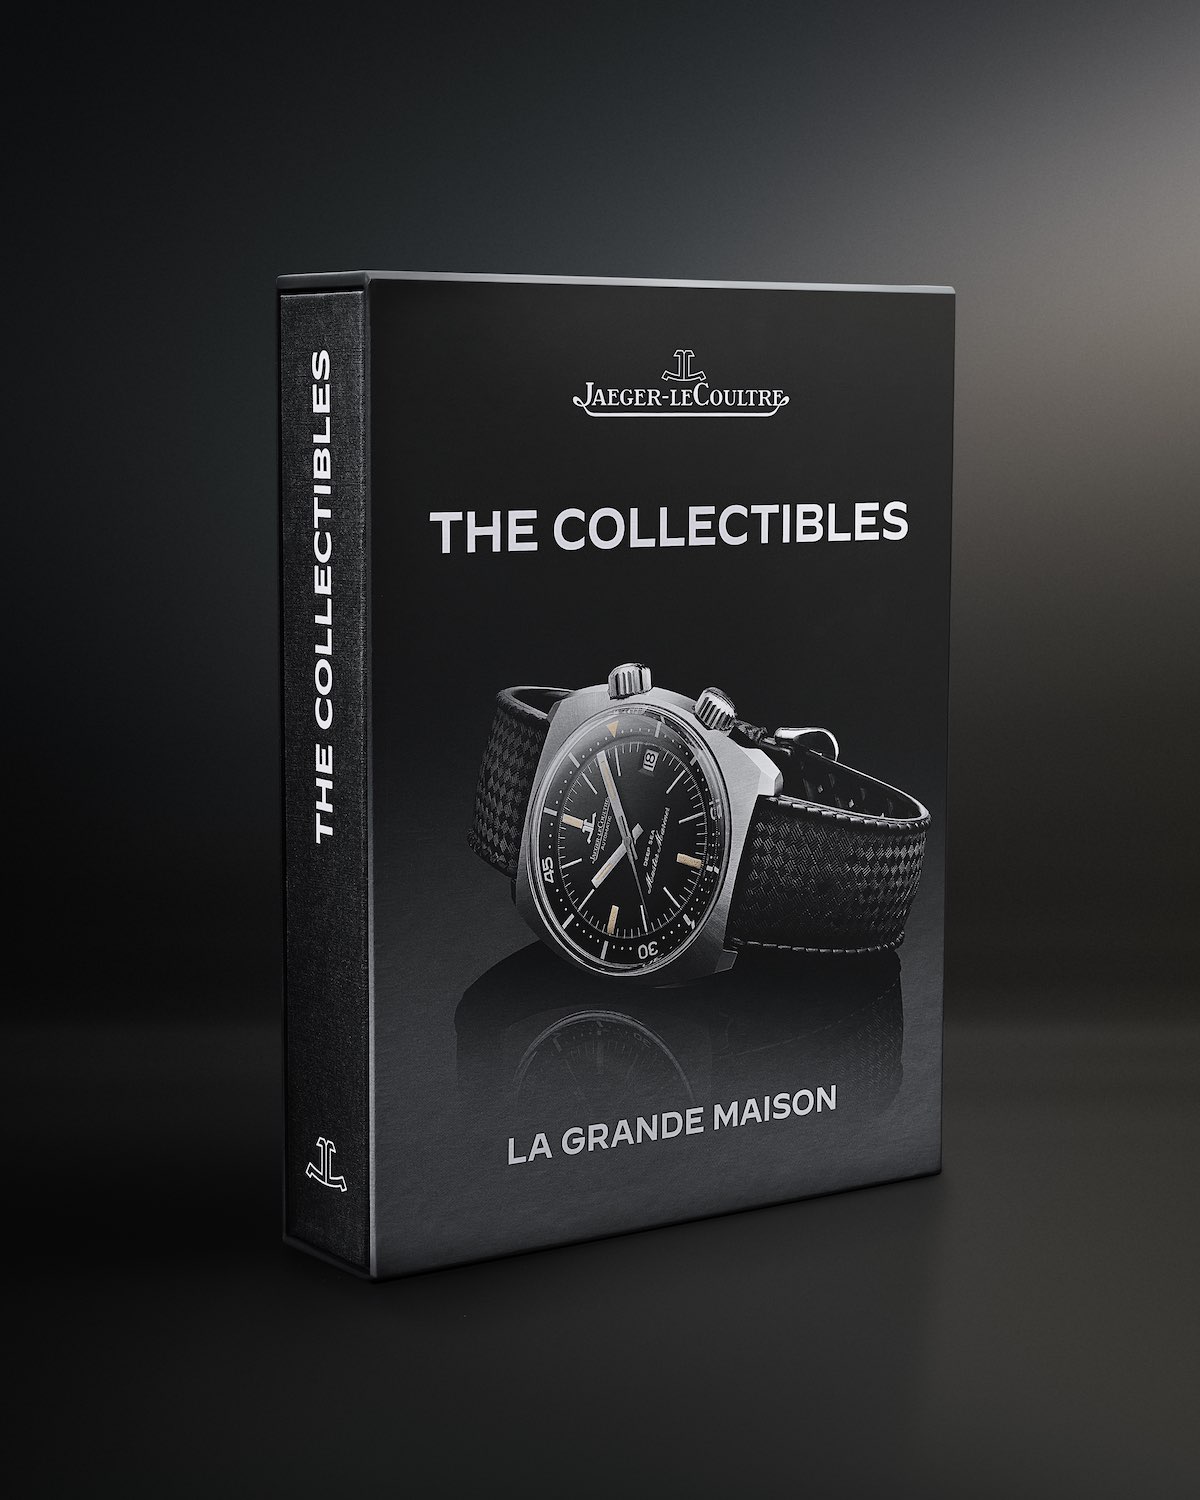 Jaeger-LeCoultre The Collectibles Collection of Pre-Owned Watches